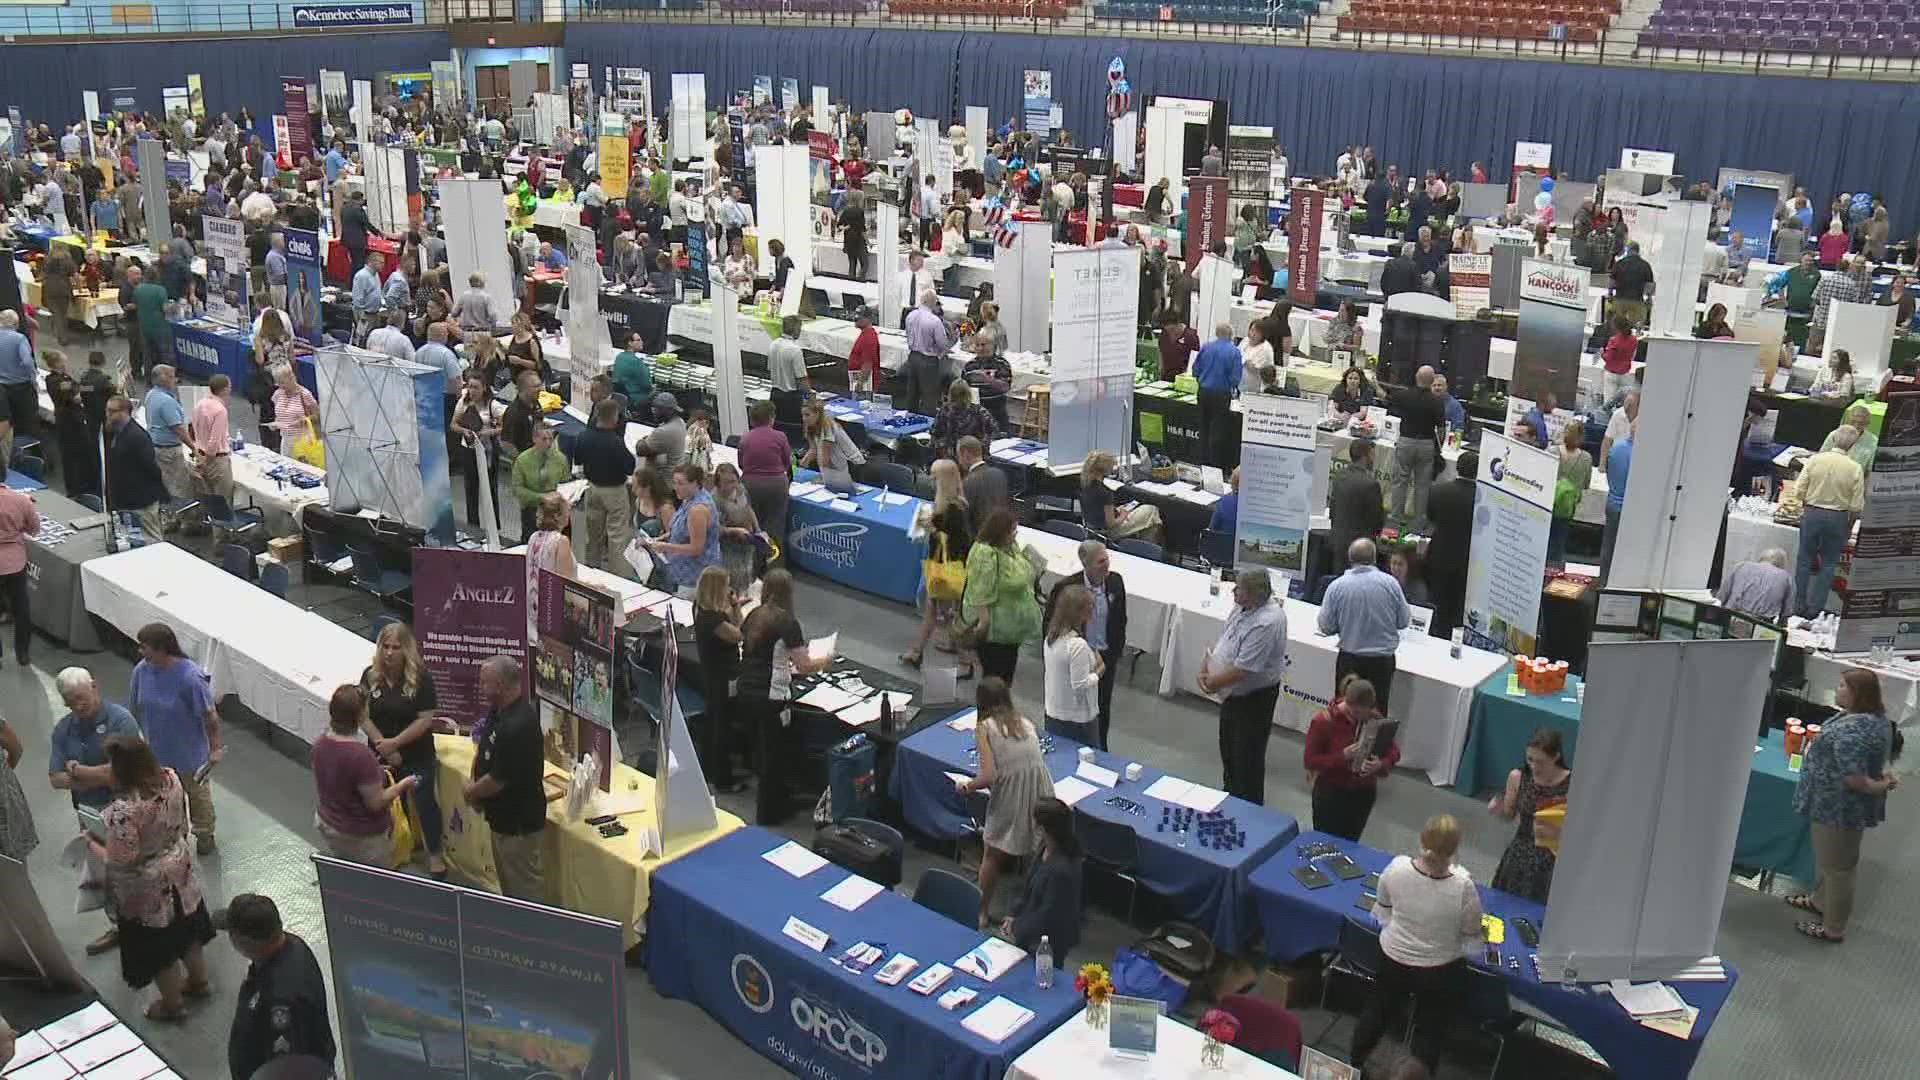 Maine's largest job fair will be held at the Augusta Civic Center from 11 a.m. to 3 p.m. Thursday, Aug. 18.